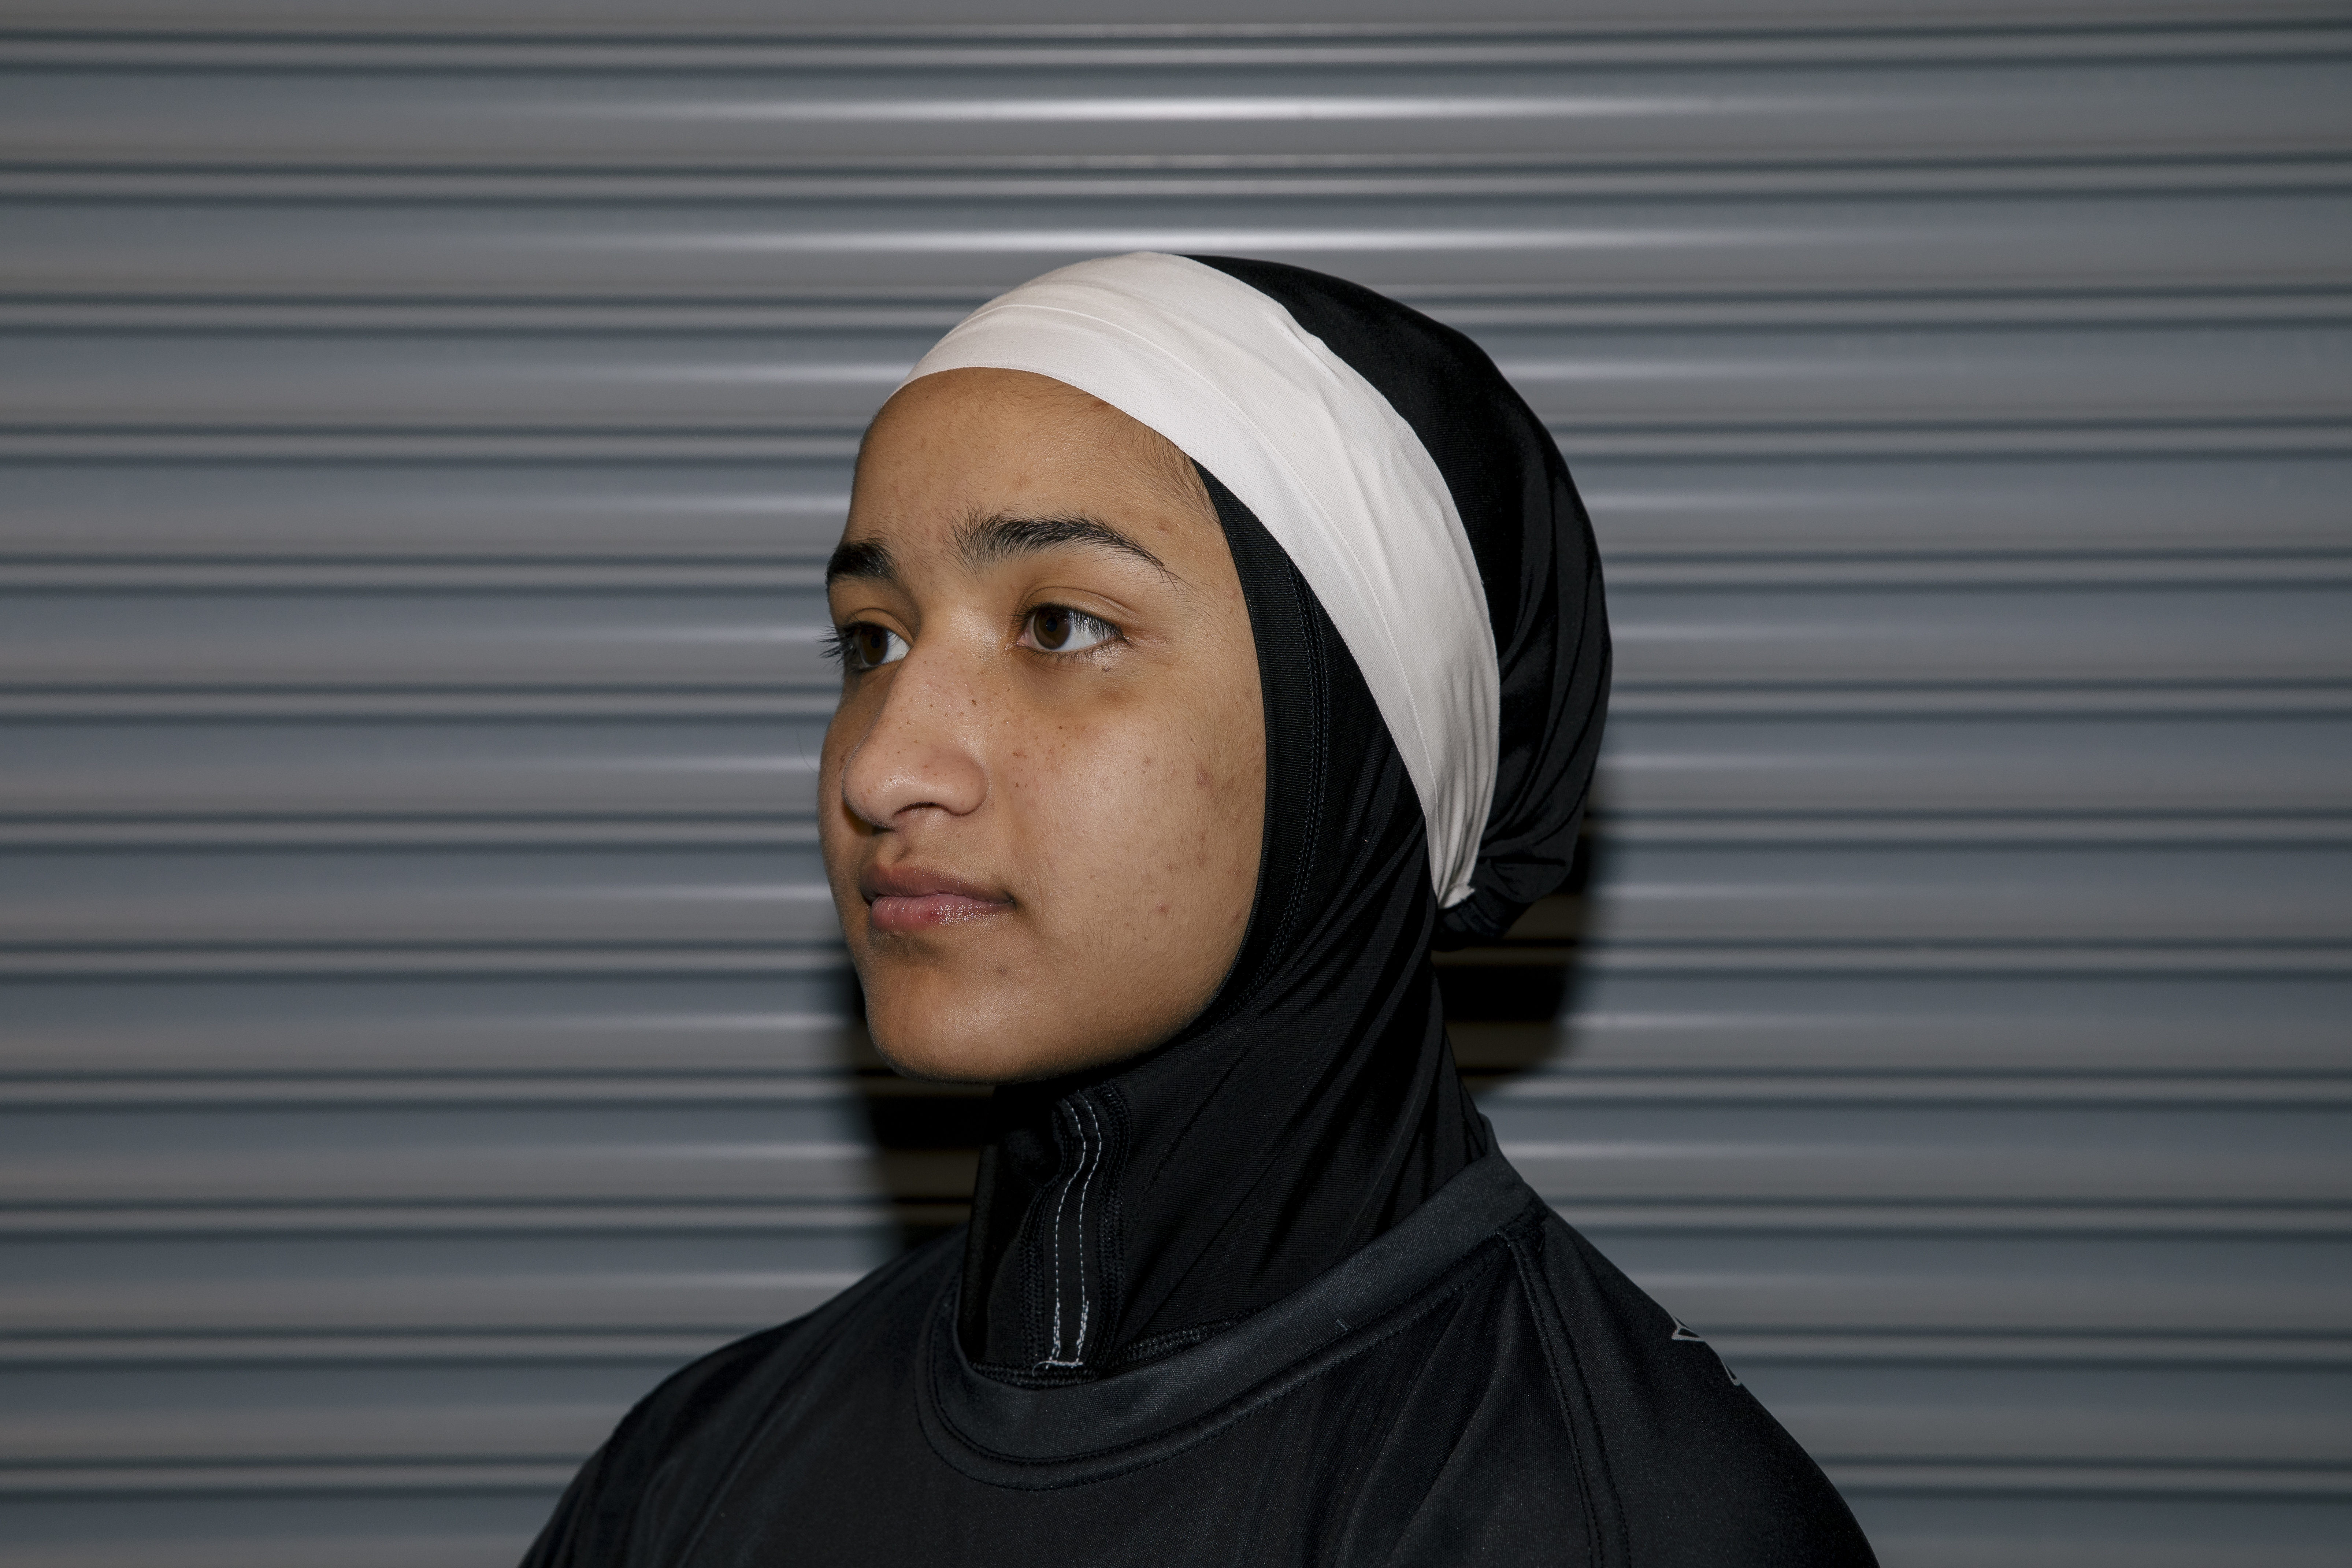 Muslim Women Wrestlers Say They Face Discrimination HuffPost Women photo photo